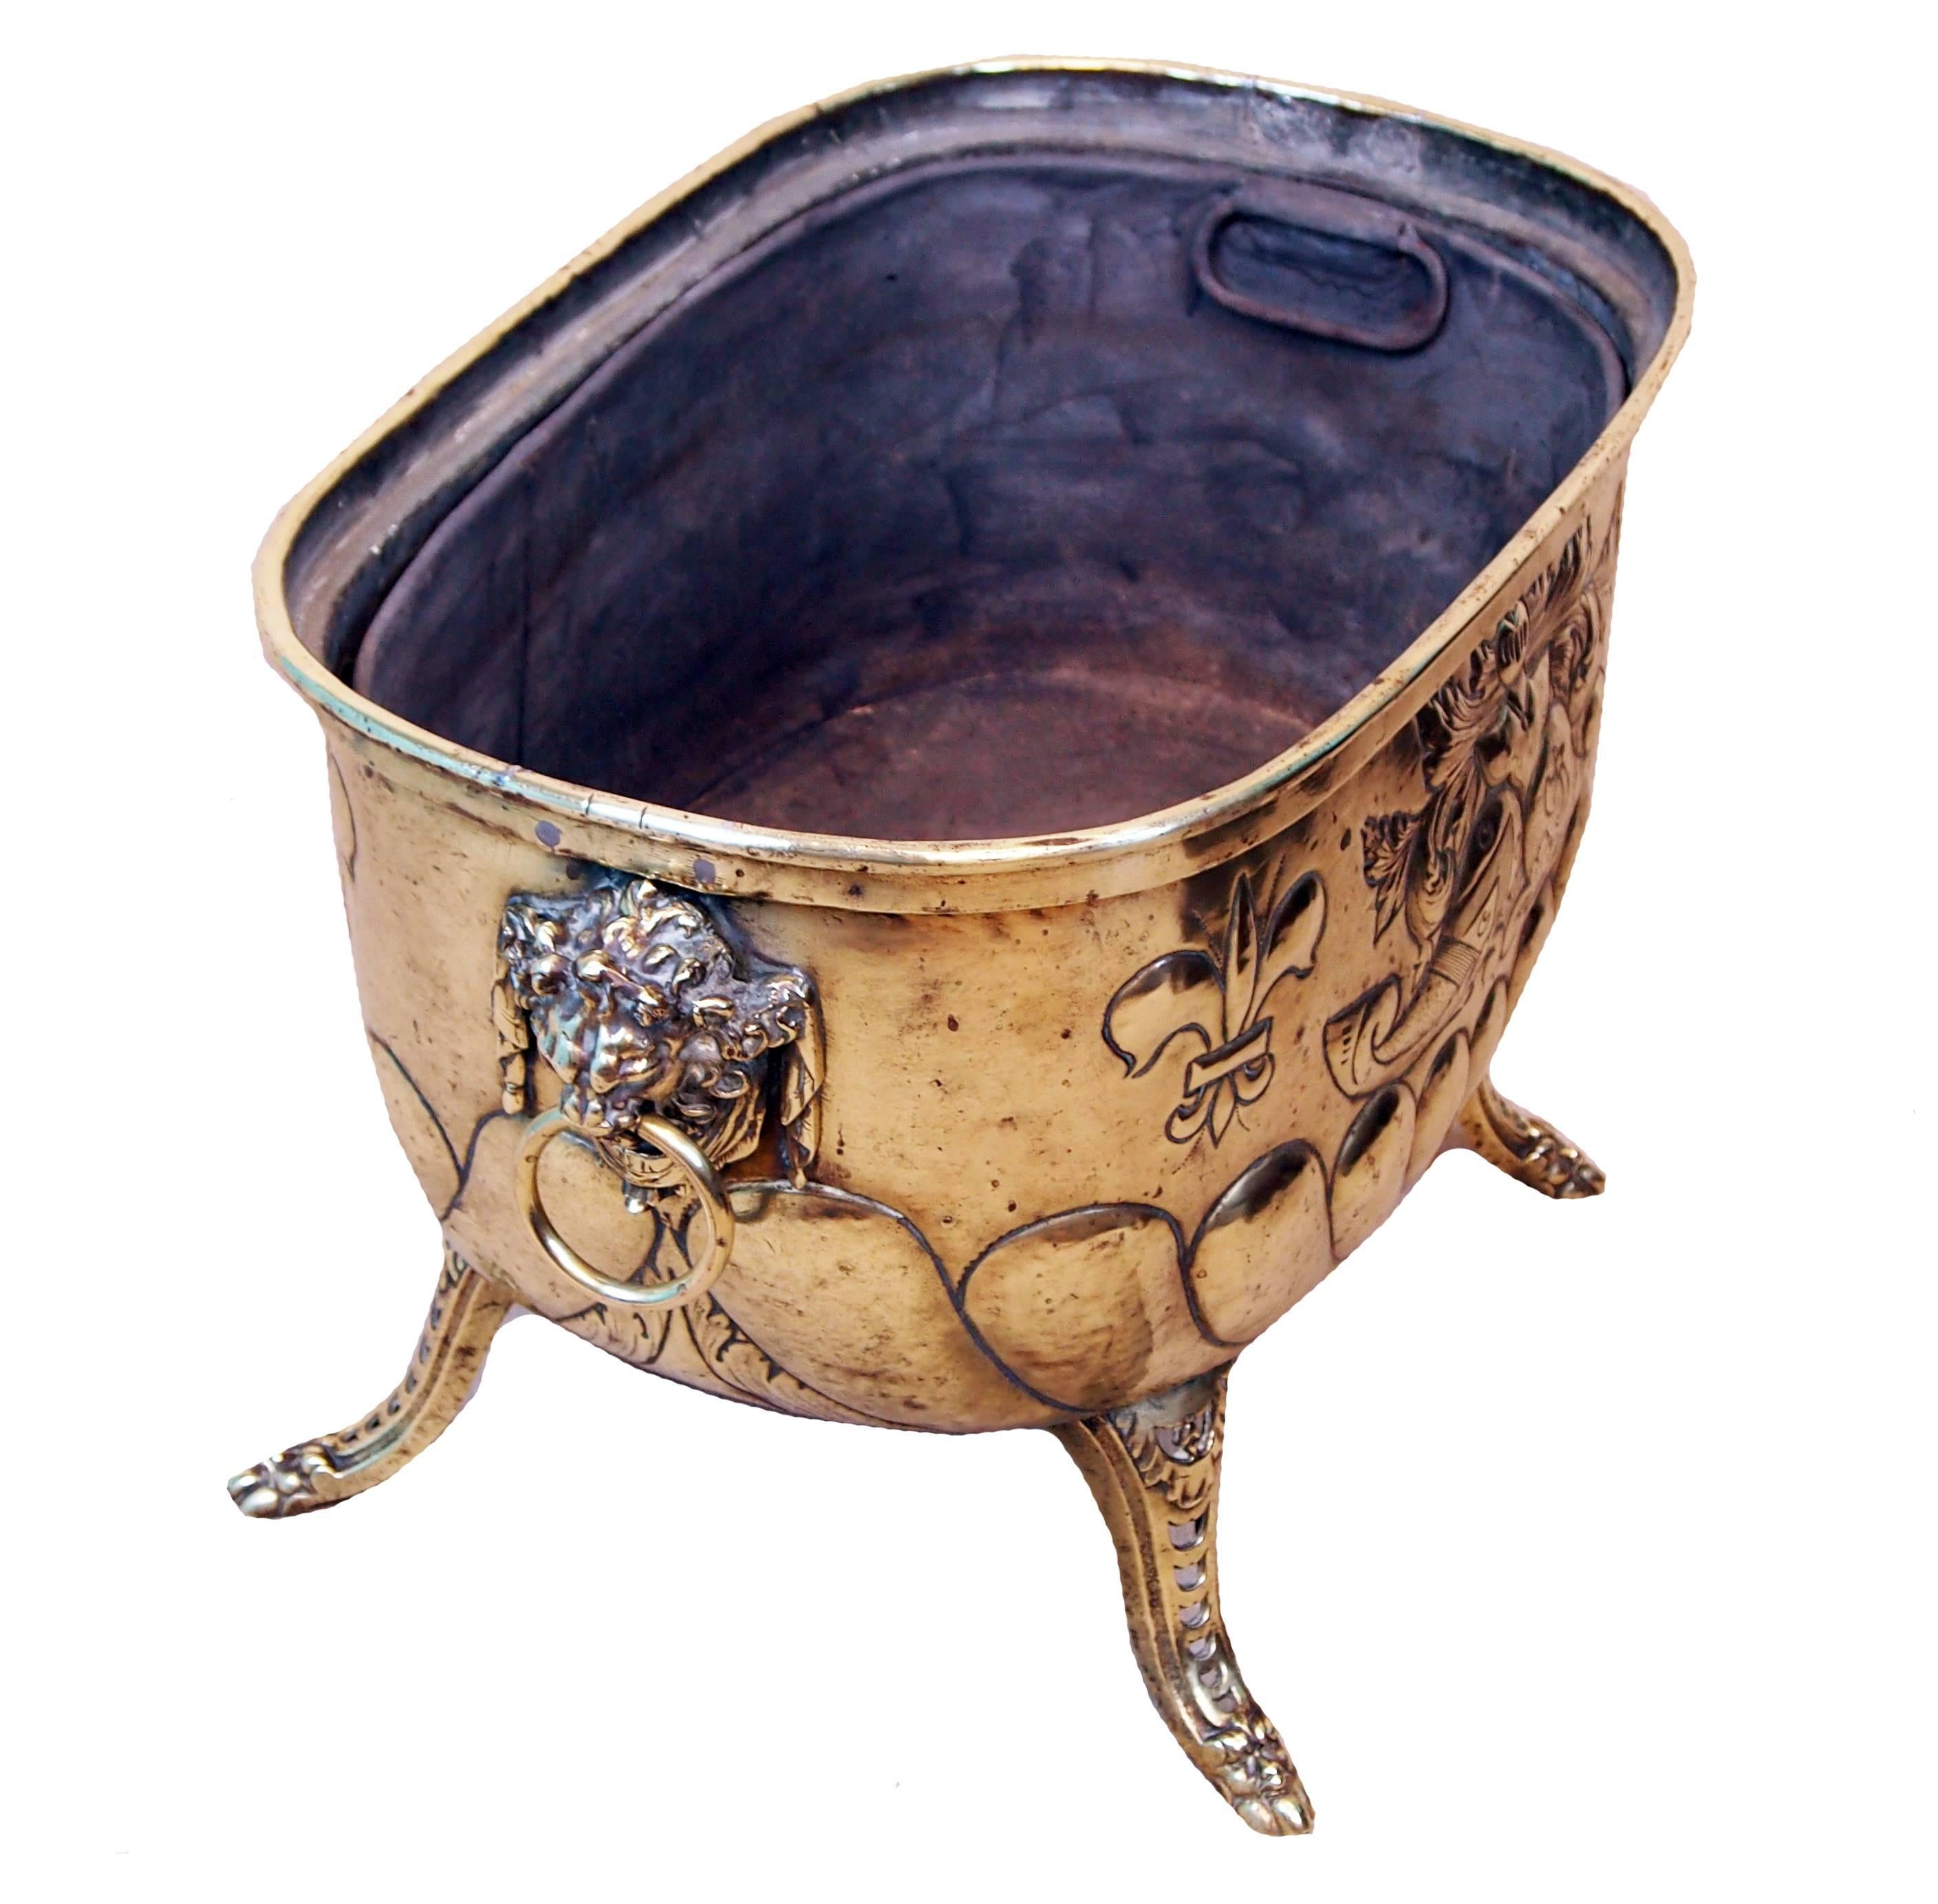 A Stunning Quality Mid 19th Century Brass Log Bin, Or
Planter, Having Armorial Typre Decoration And Original 
Lions Mask Carrying Handles Raised On Elegant
Pierced Tapering Legs